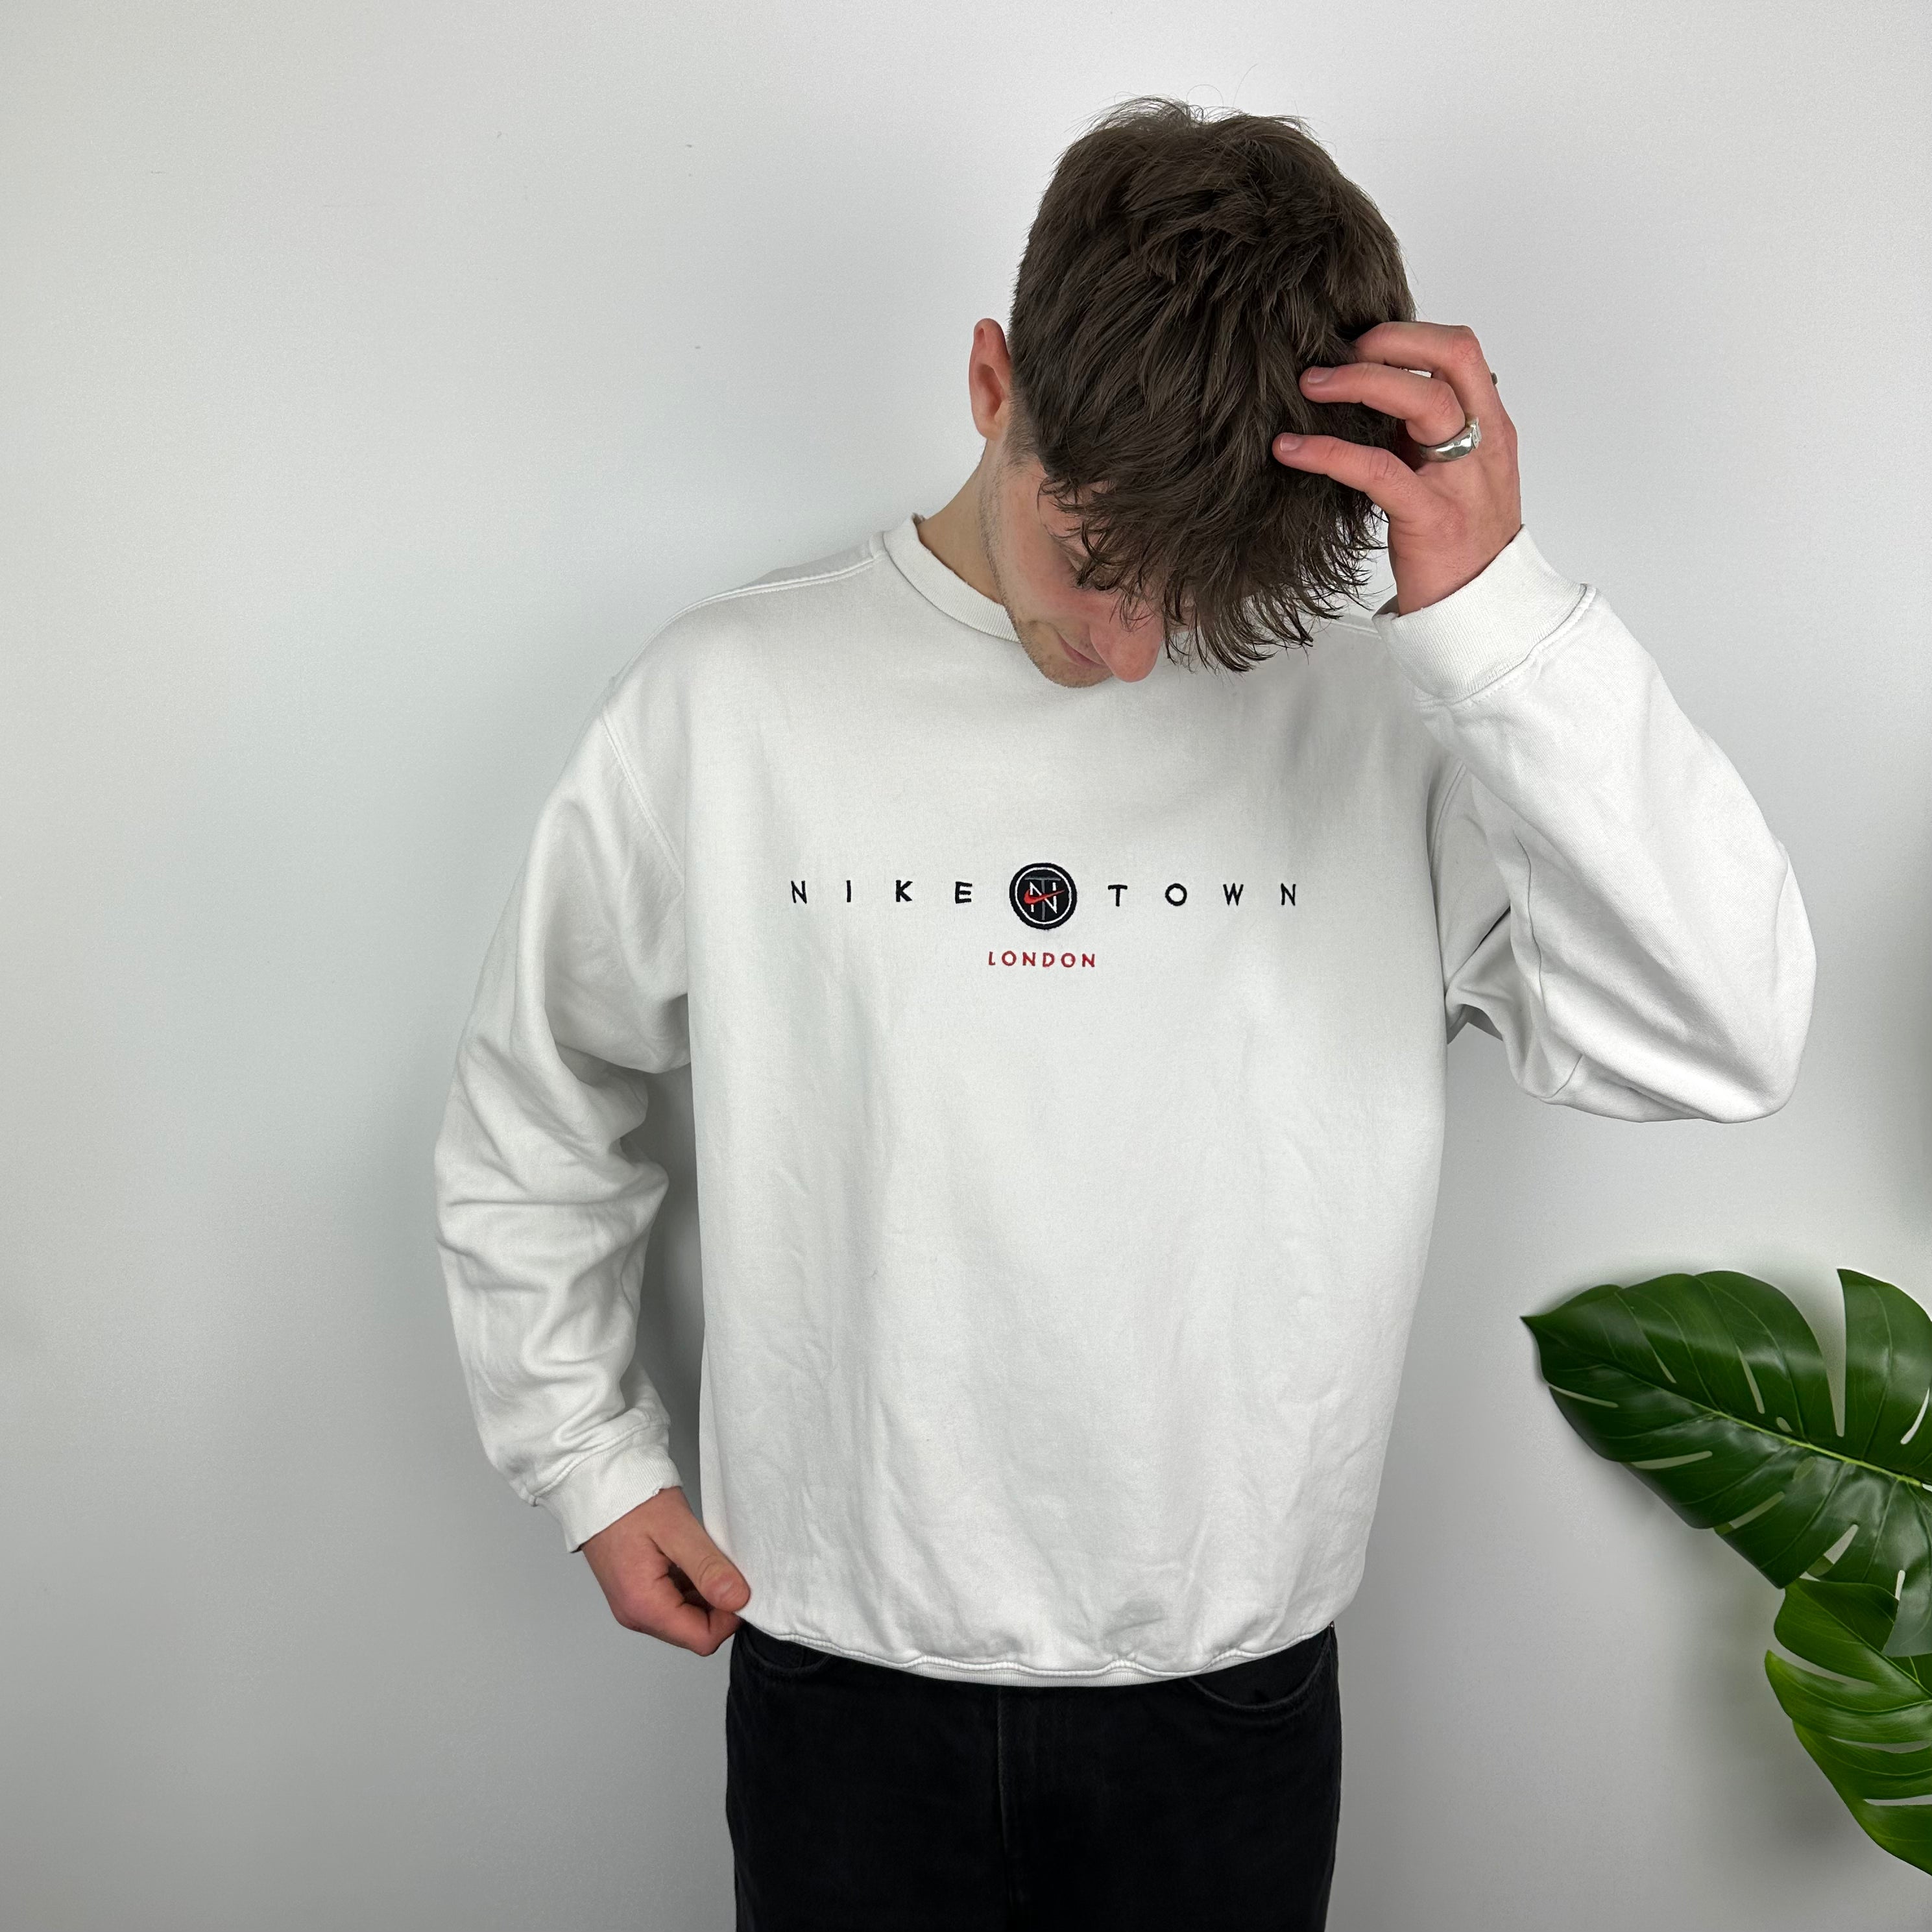 Nike Town London White Embroidered Spell Out Sweatshirt (L)